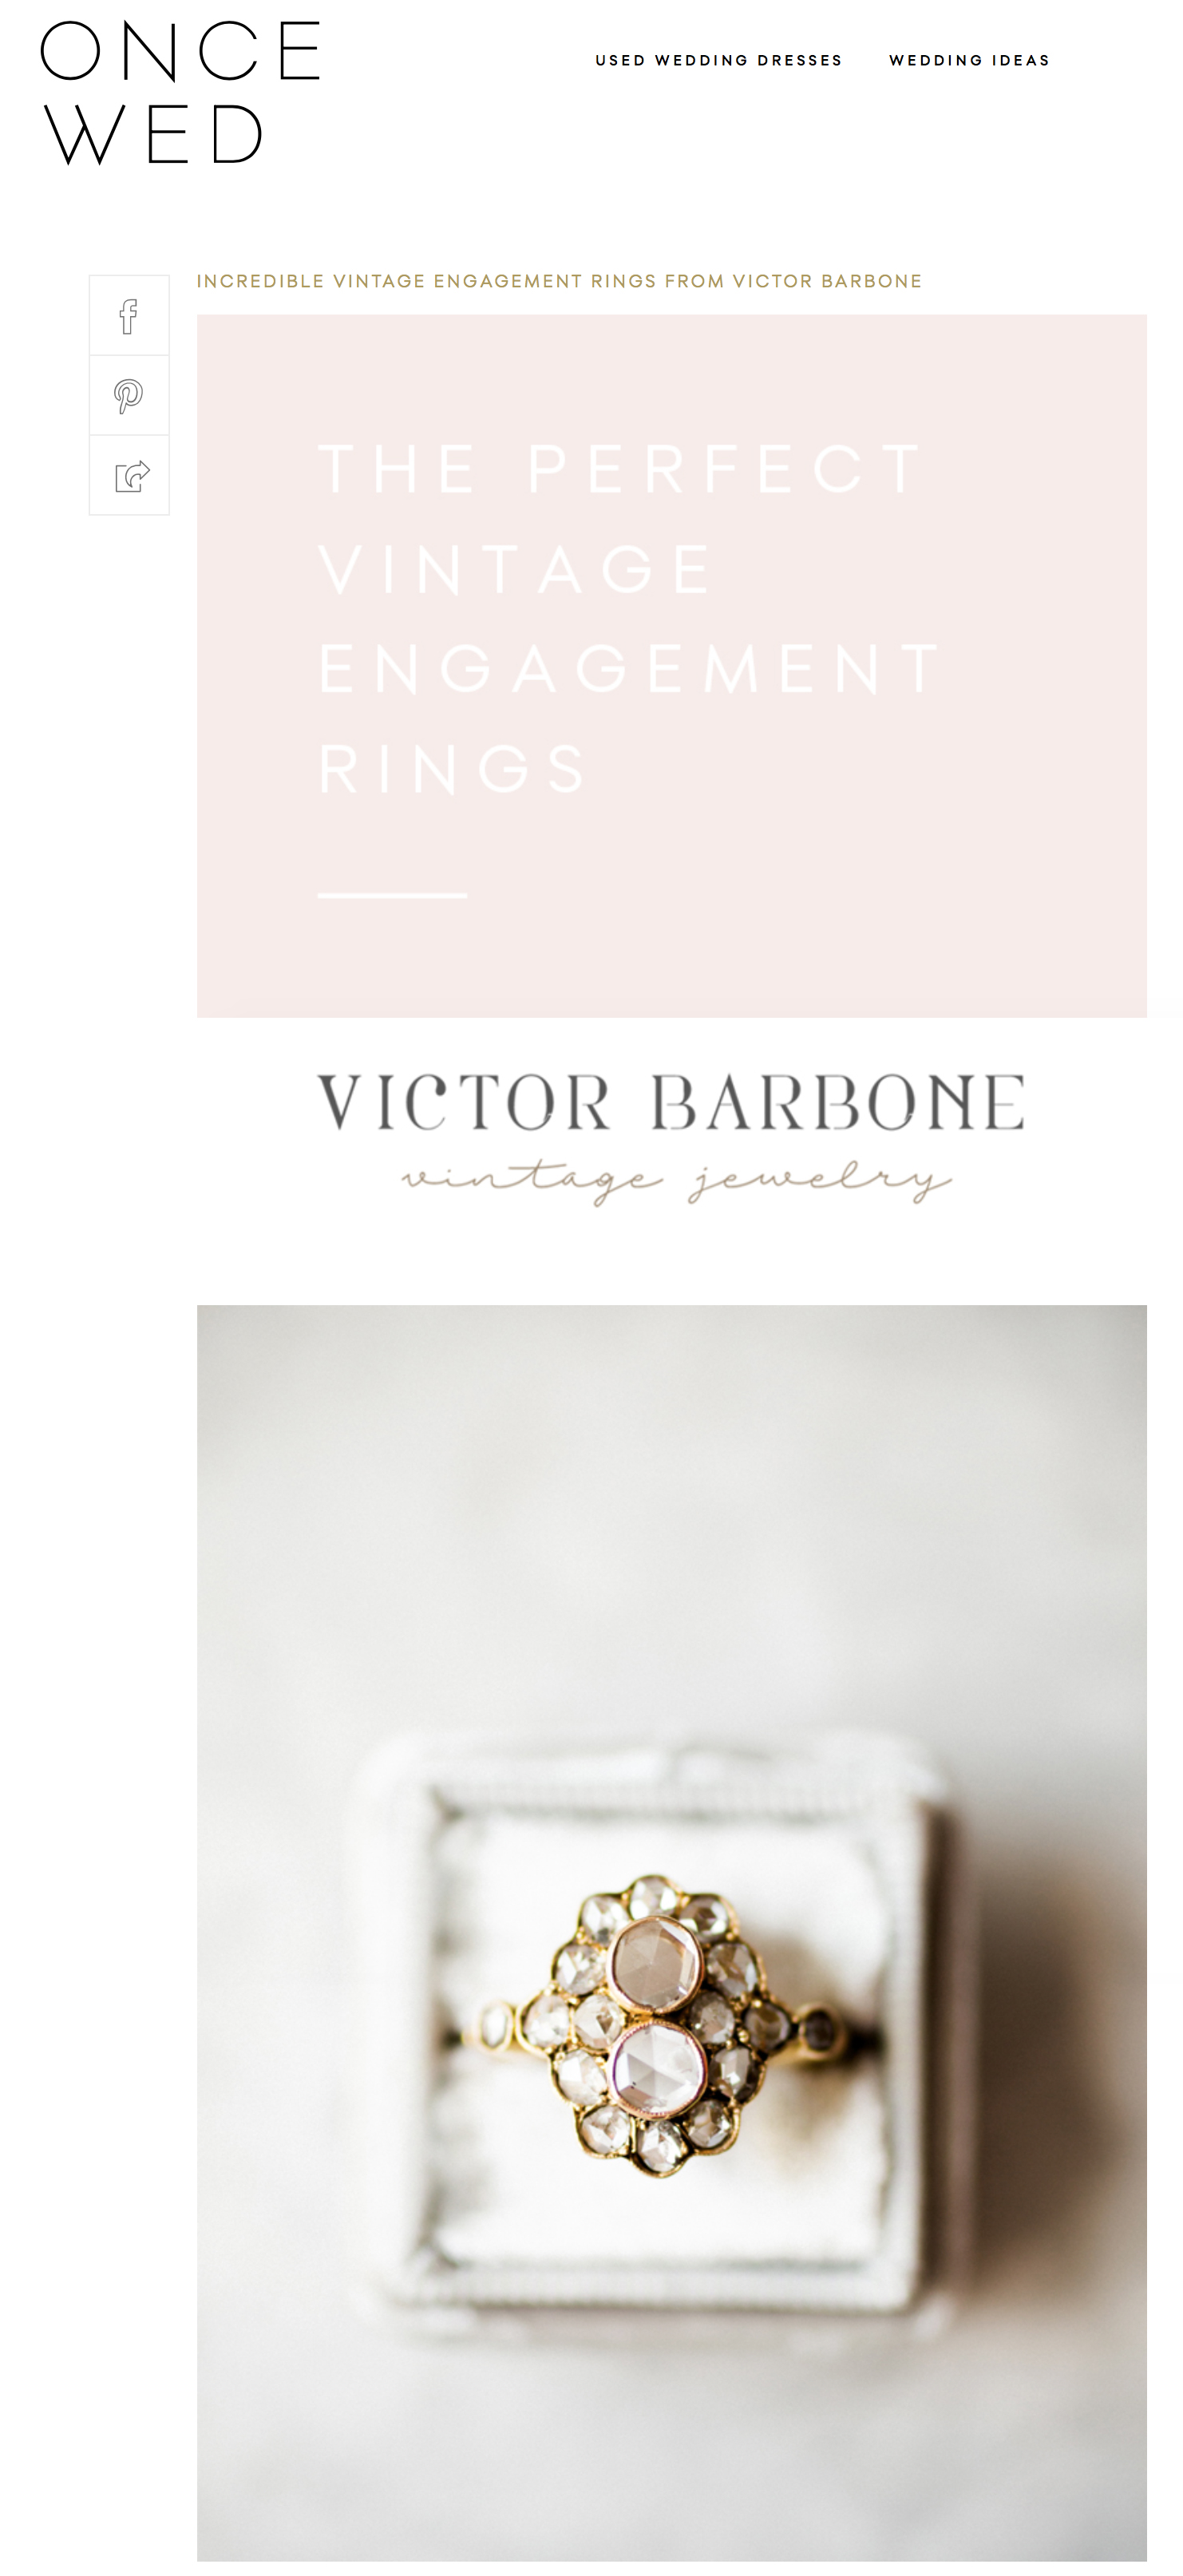 Rachel Red Photography Featured in Once Wed | Vintage Engagement Rings